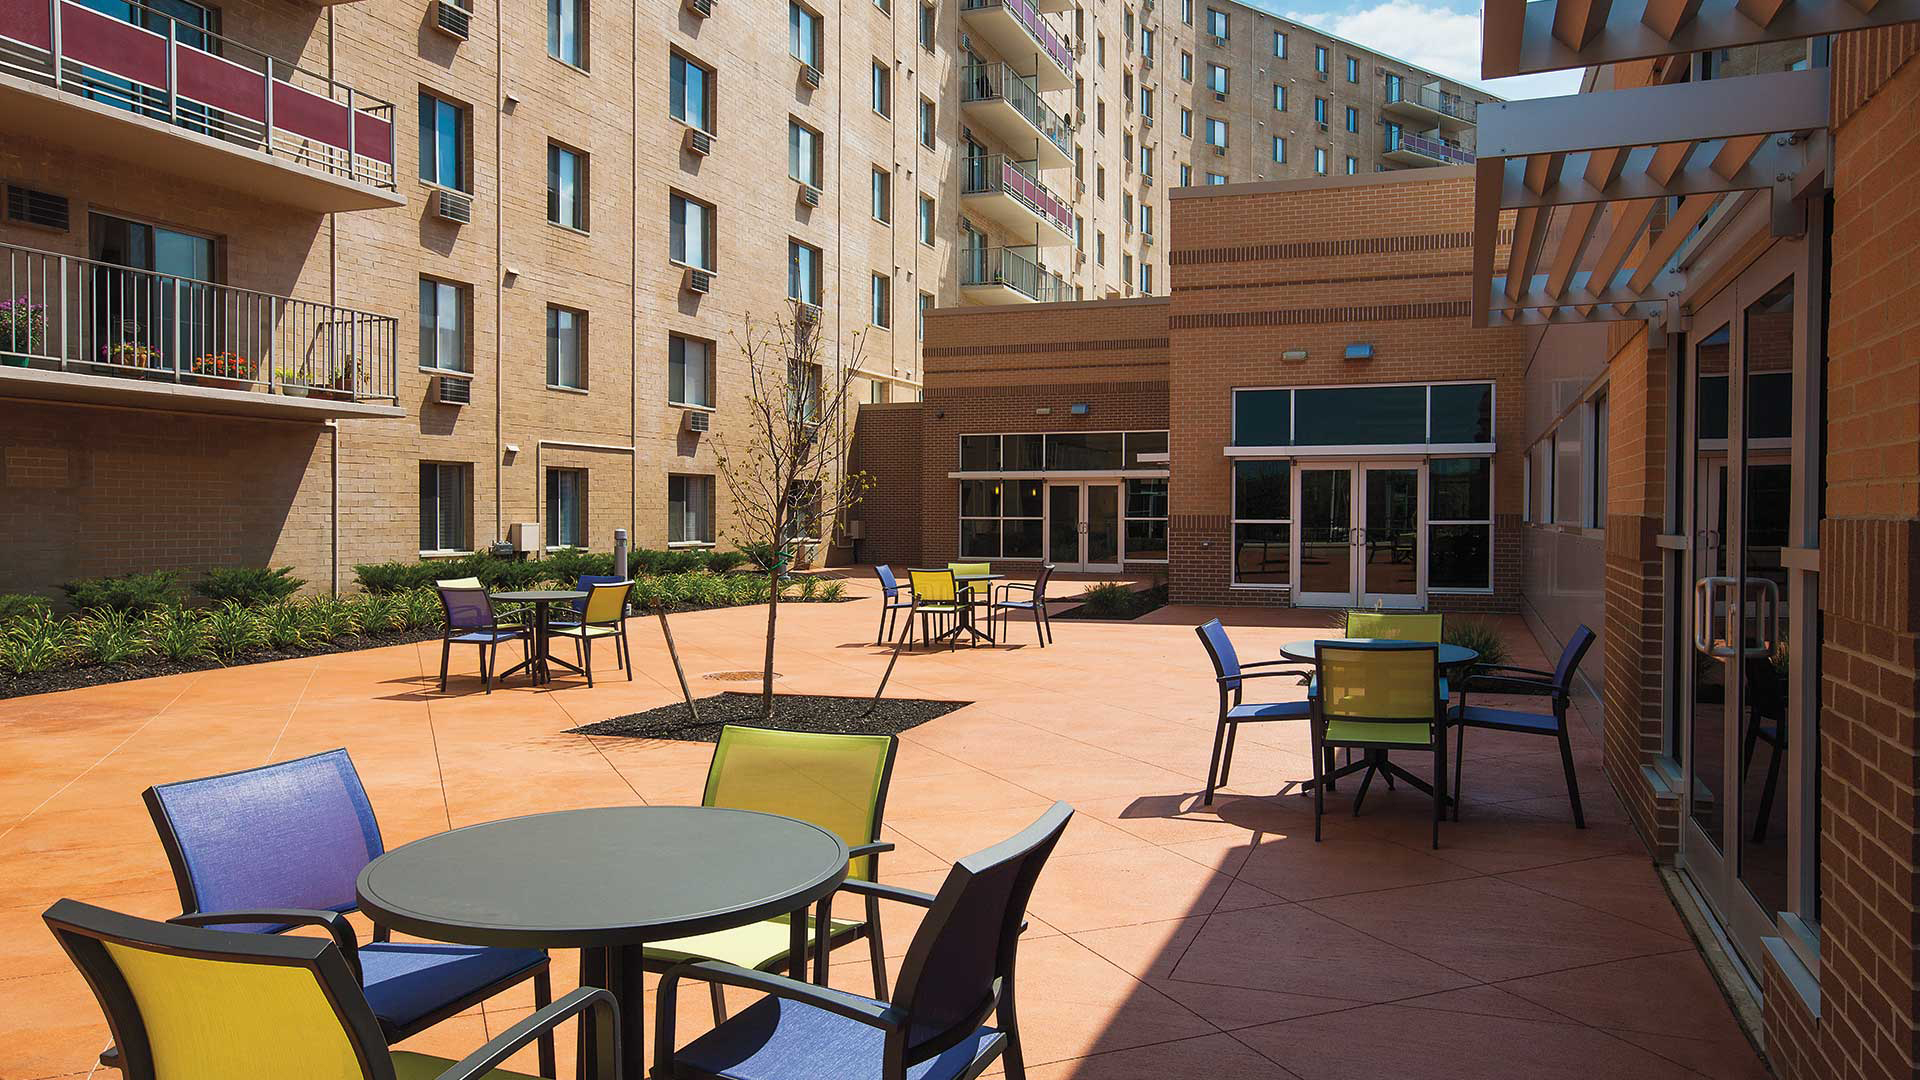 Outdoor courtyard in an apartment building